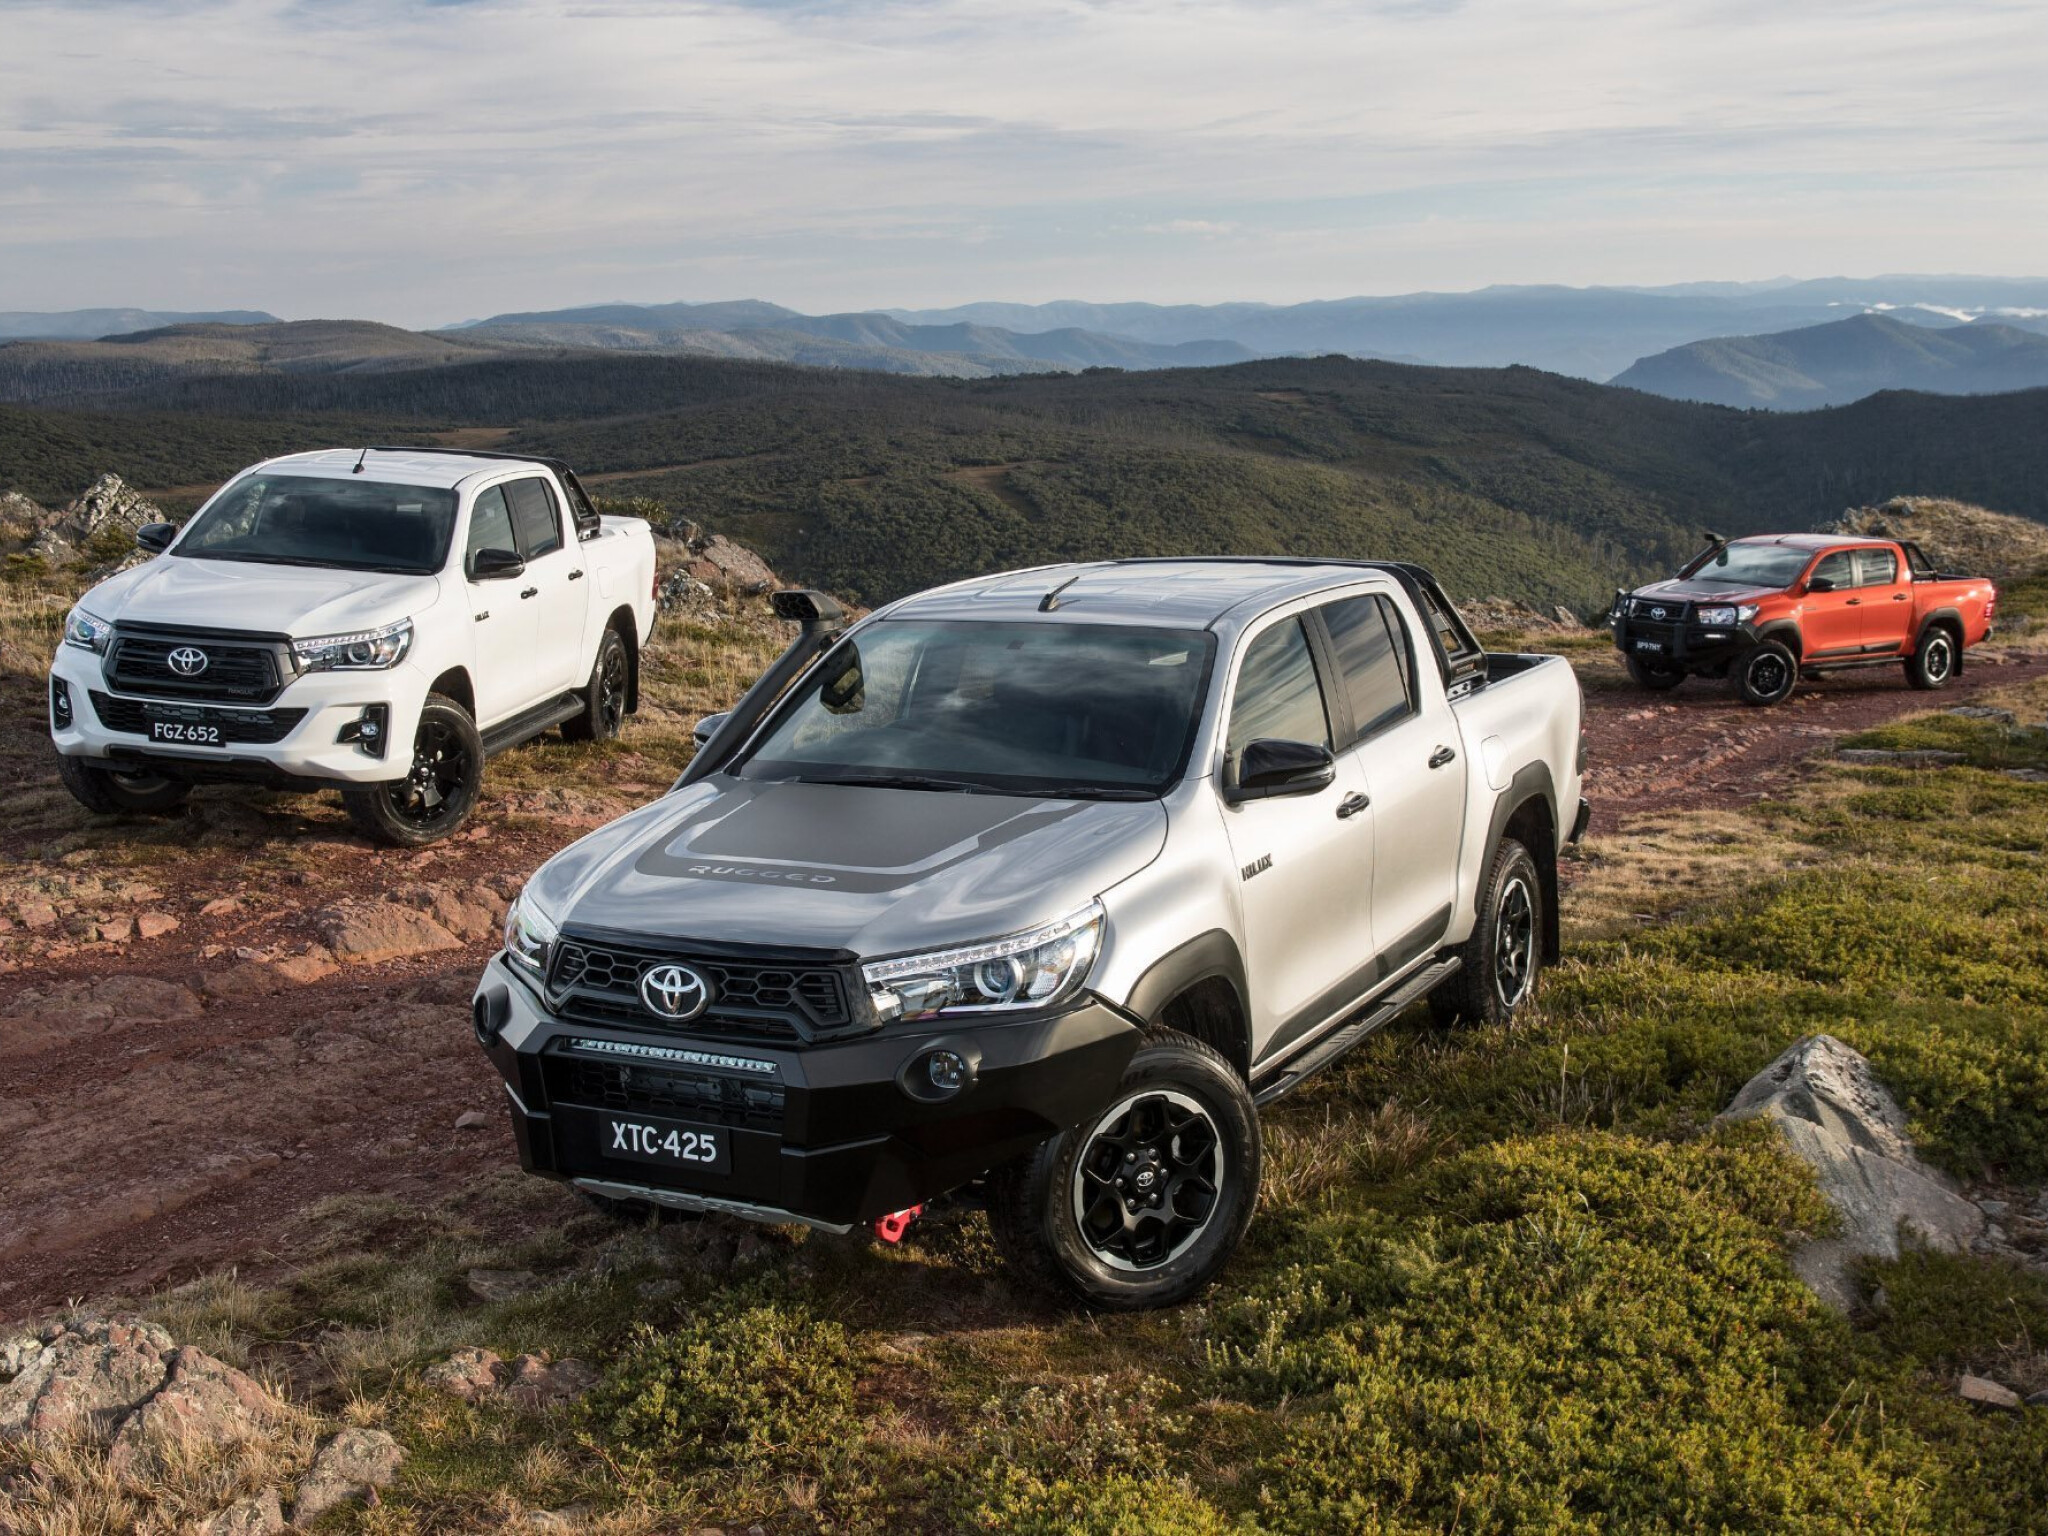 Toyota Hilux Electric Pickup Under 'Investigation,' Says Exec